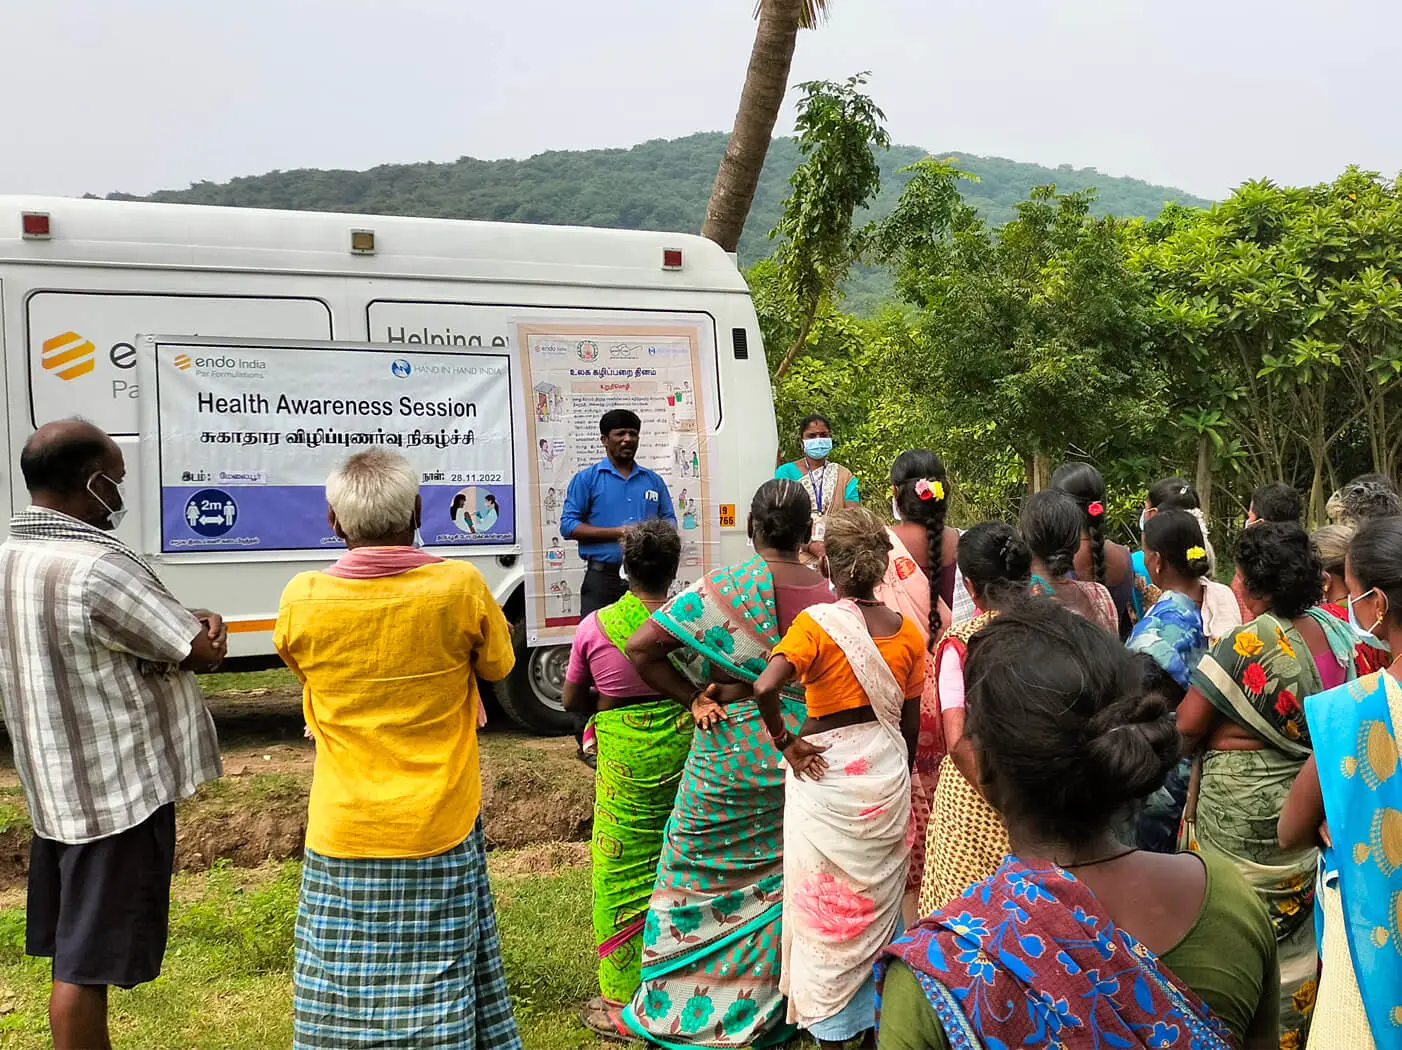 A group of patients in India gather outside a mobile health van.